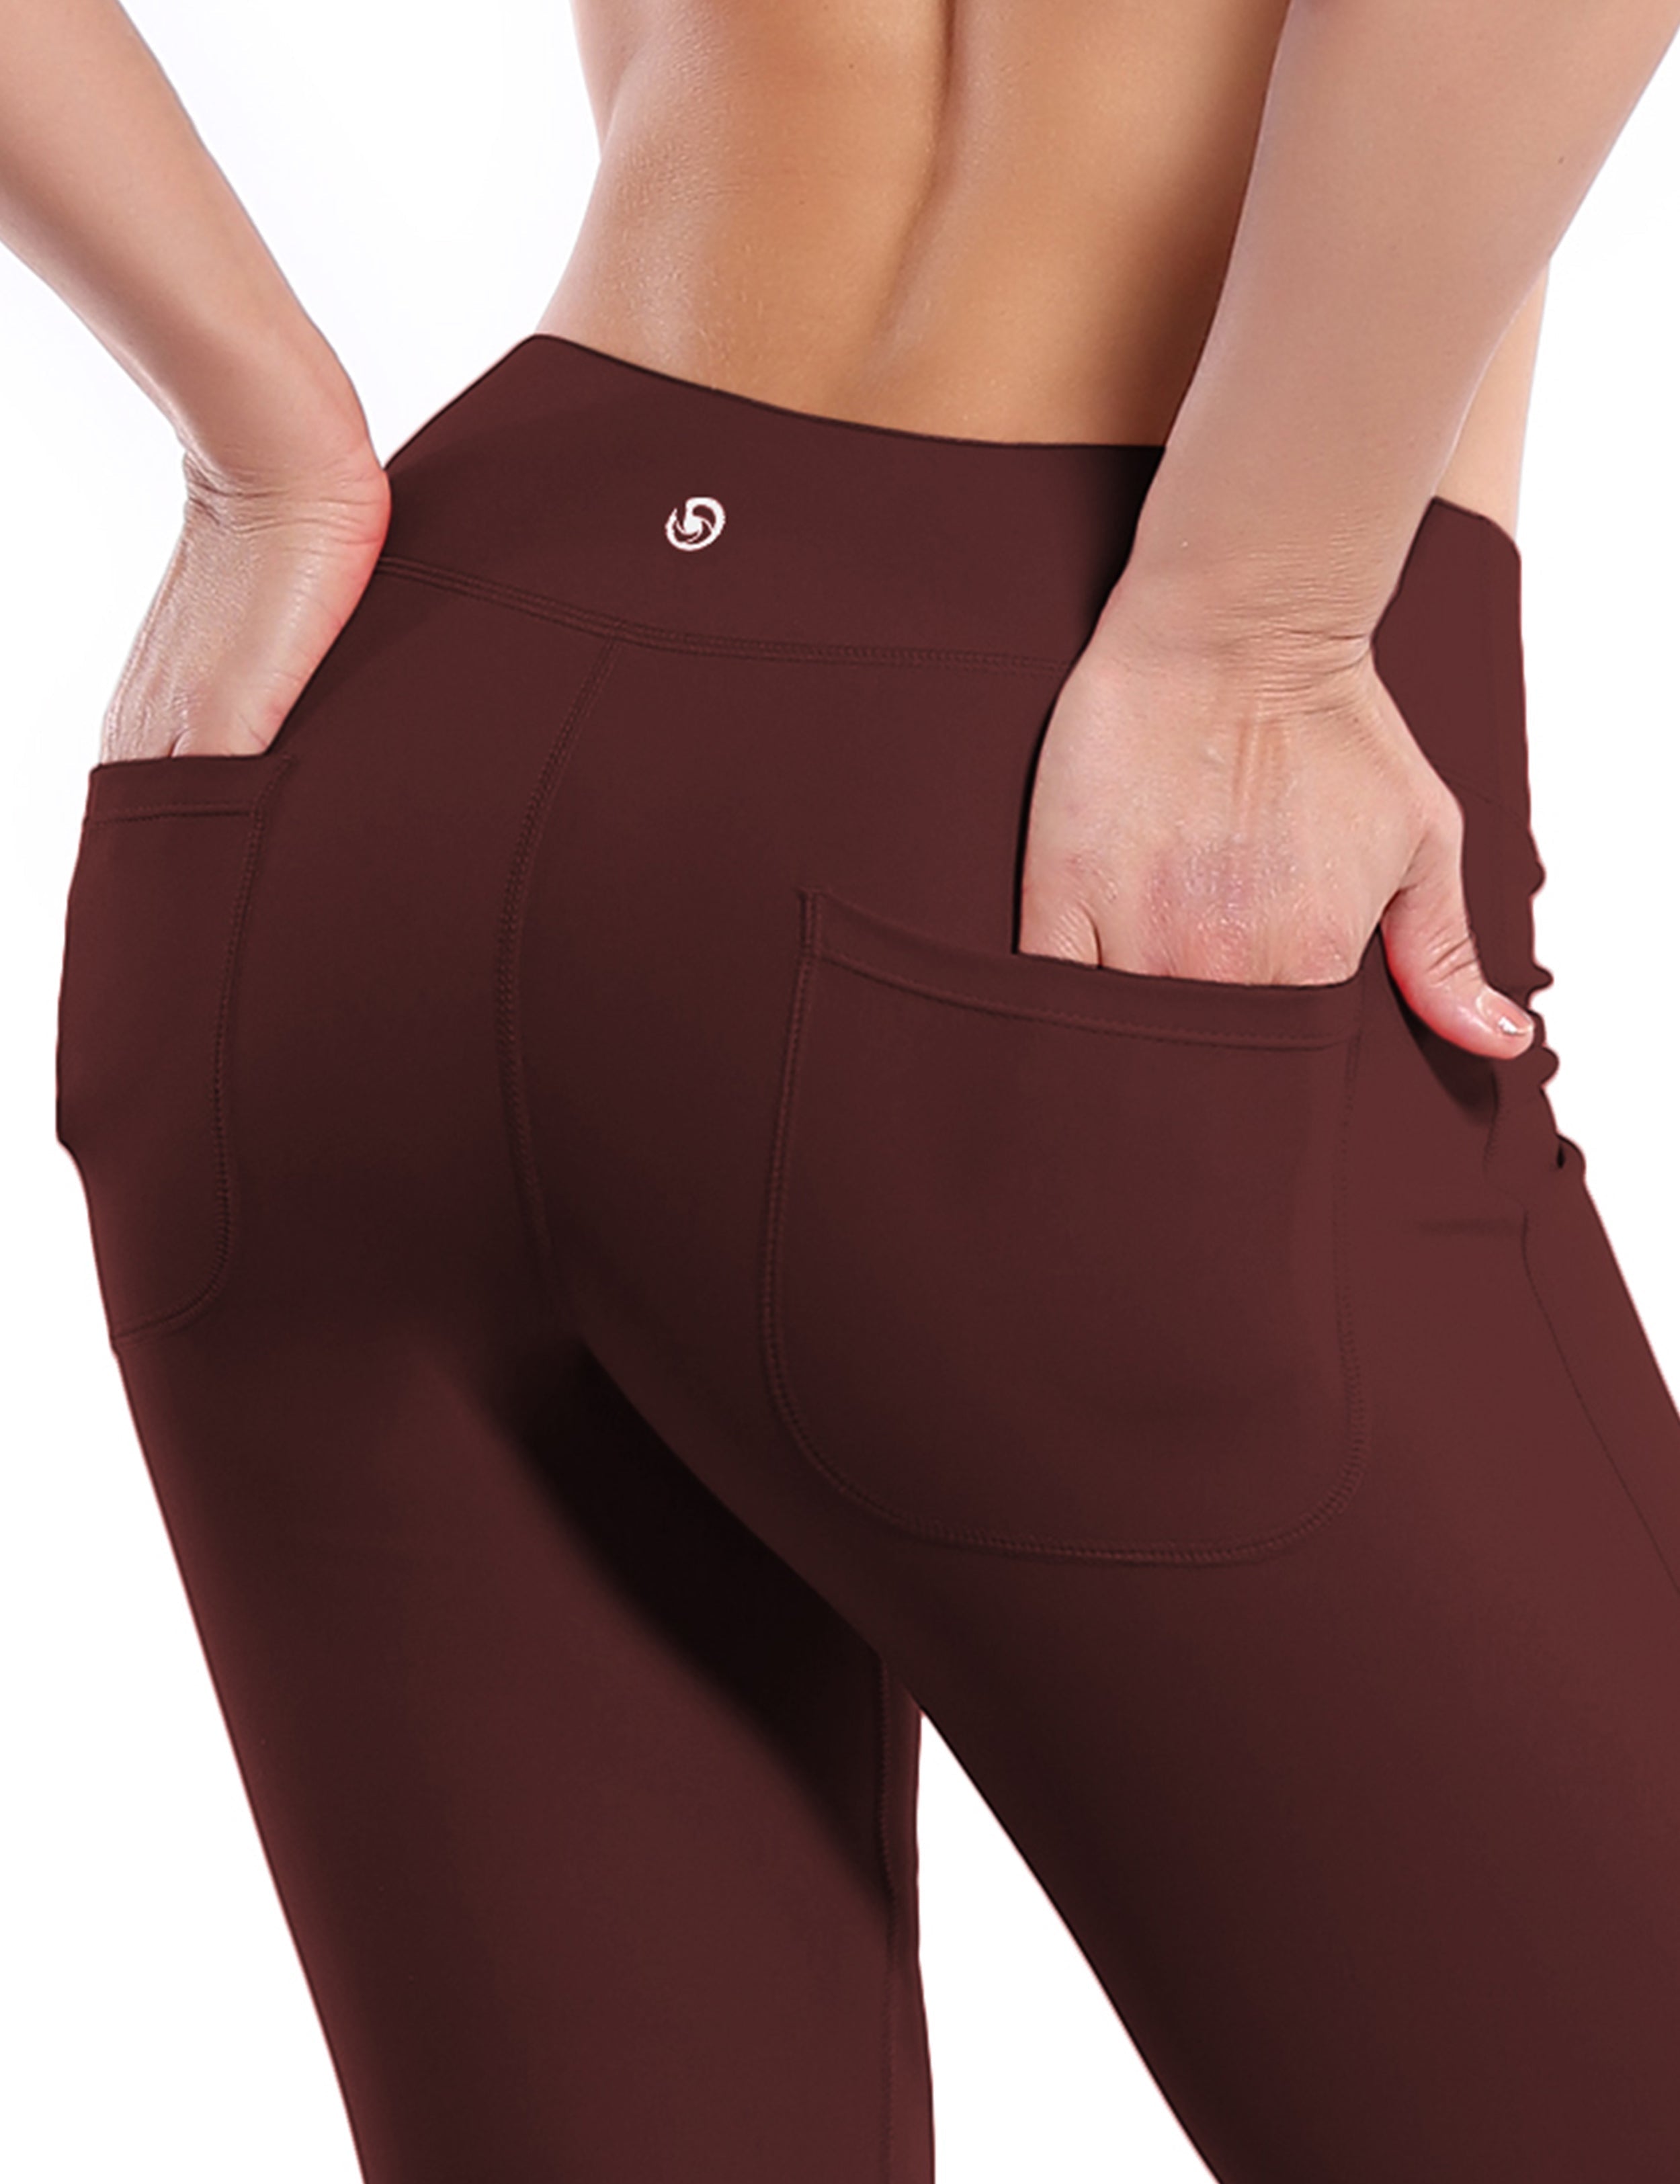 4 Pockets Bootcut Leggings mahoganymaroon 75%Nylon/25%Spandex Fabric doesn't attract lint easily 4-way stretch No see-through Moisture-wicking Inner pocket Four lengths